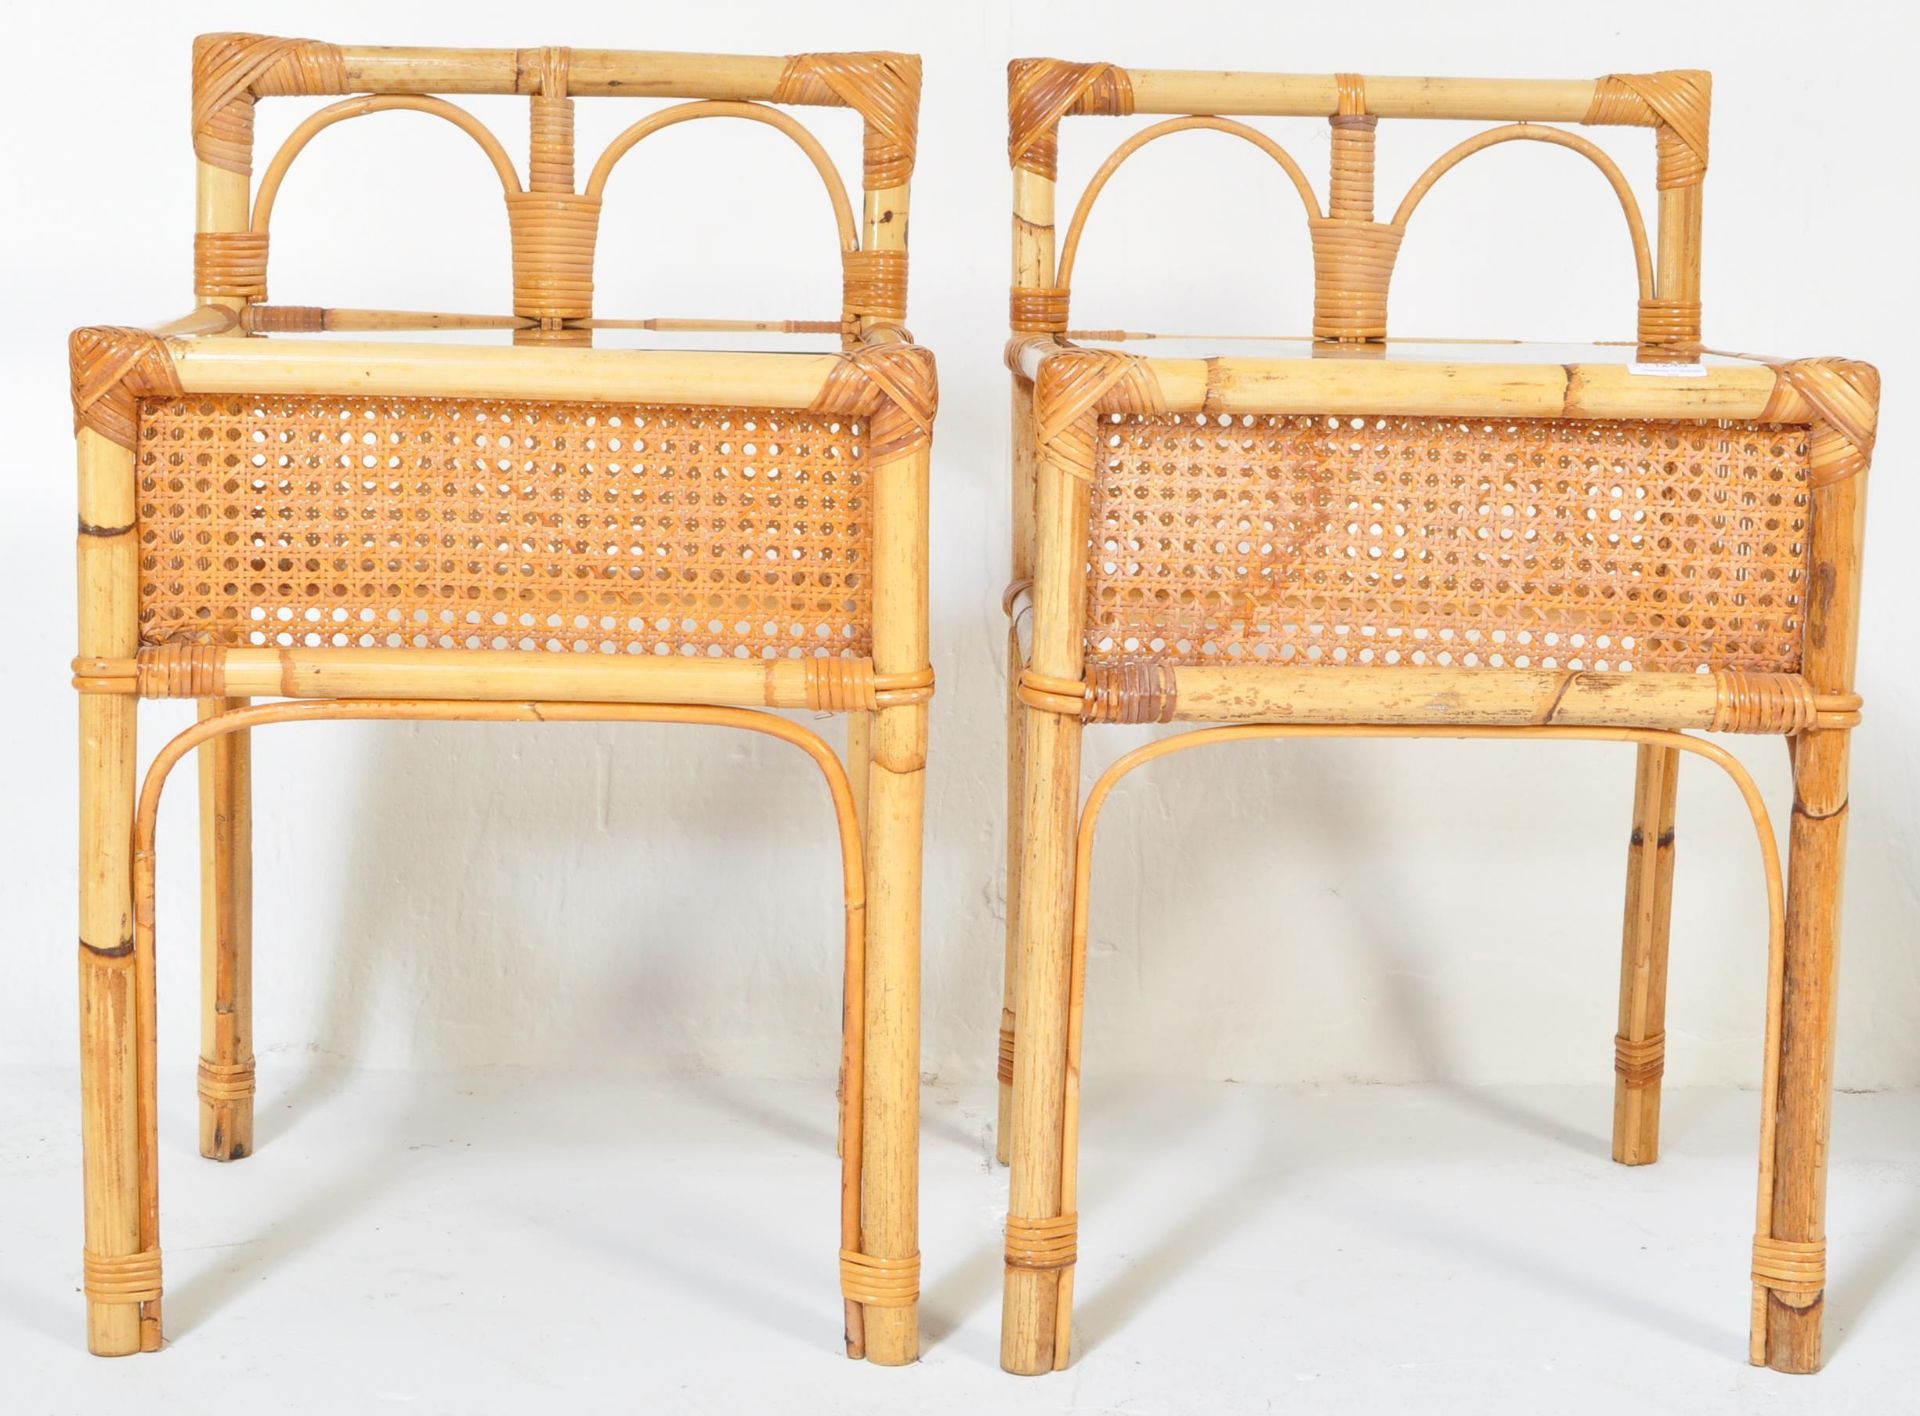 PAIR OF RETRO VINTAGE BAMBOO RATTAN BEDSIDE TABLES - Image 3 of 5